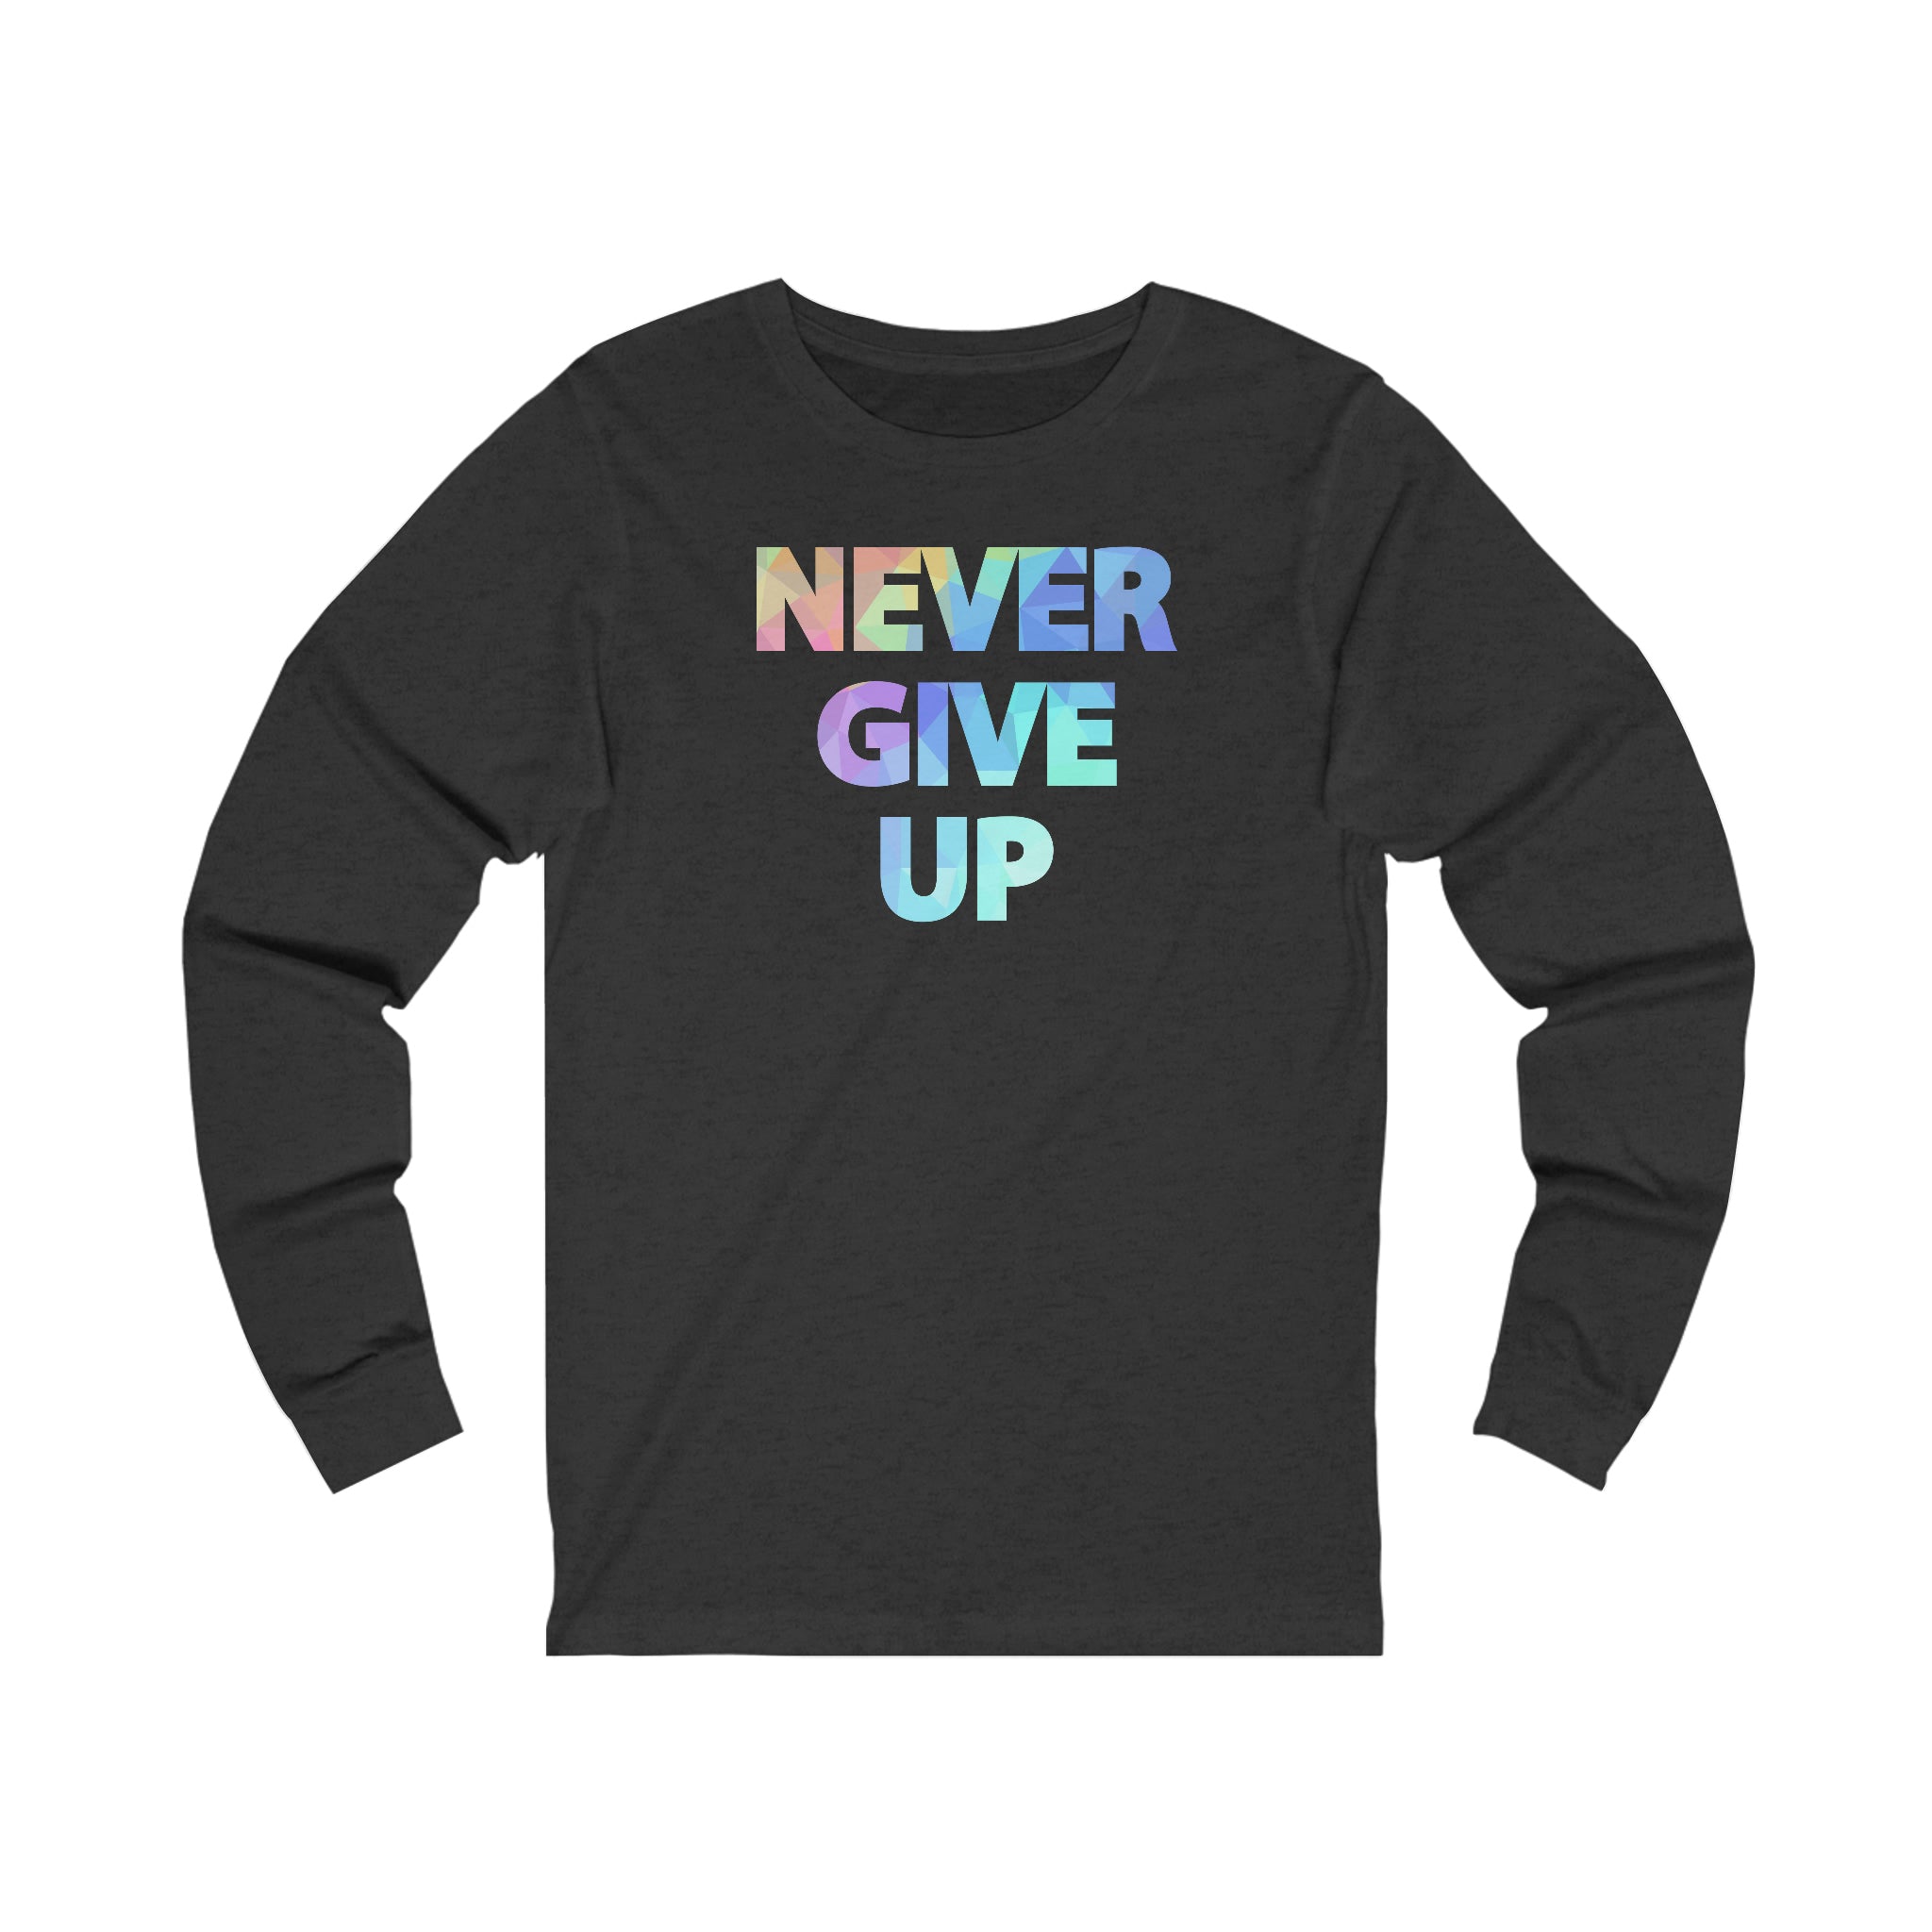 "Never Give Up" light - Unisex Jersey Long Sleeve Tee - 7 colors